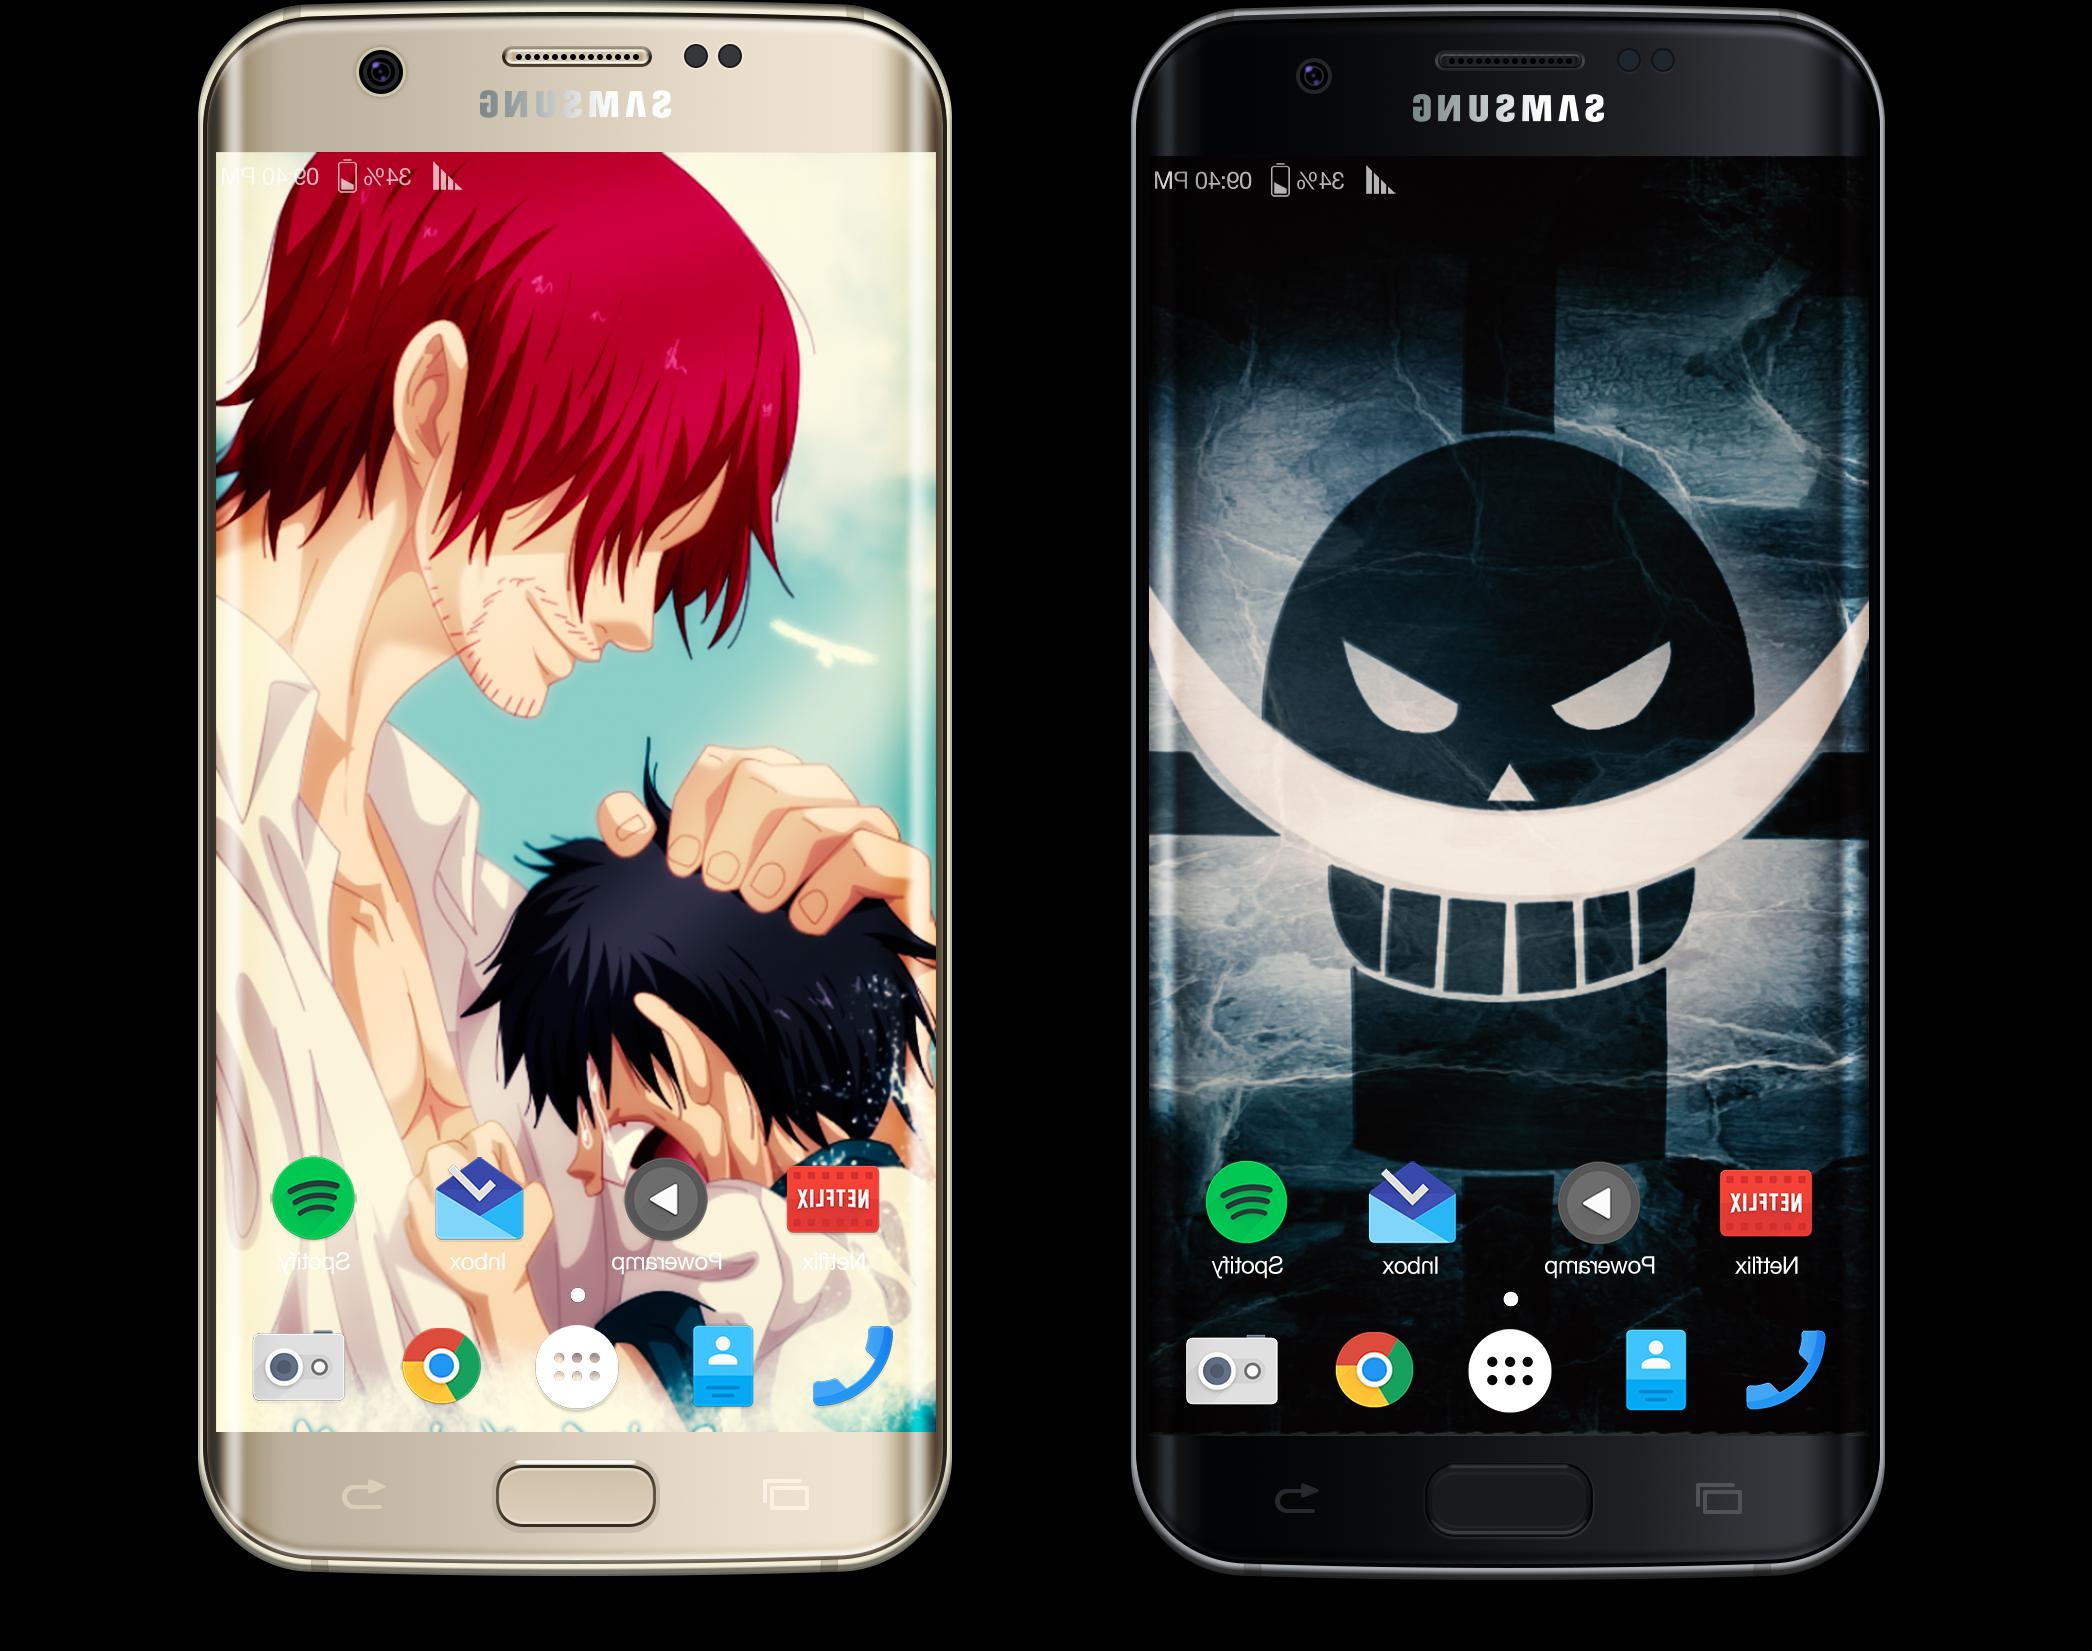 Cool One Piece Wallpapers 4k For Android Apk Download